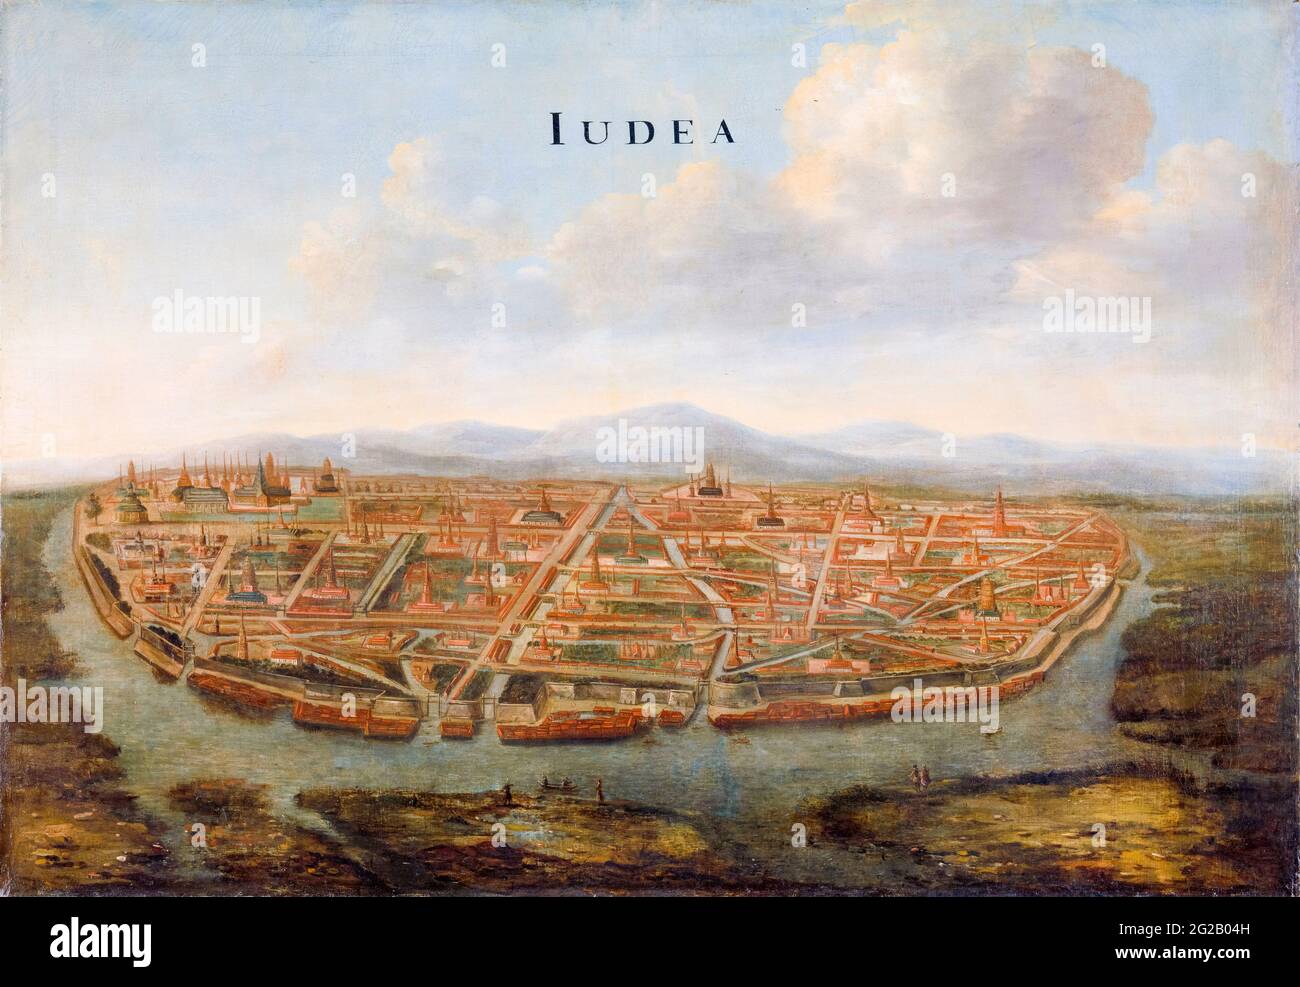 17th Century view of the port and city of Judea (Ayutthaya), the capital of the Kingdom of Siam (Thailand), landscape painting by Johannes Vinckboons, 1662-1663 Stock Photo